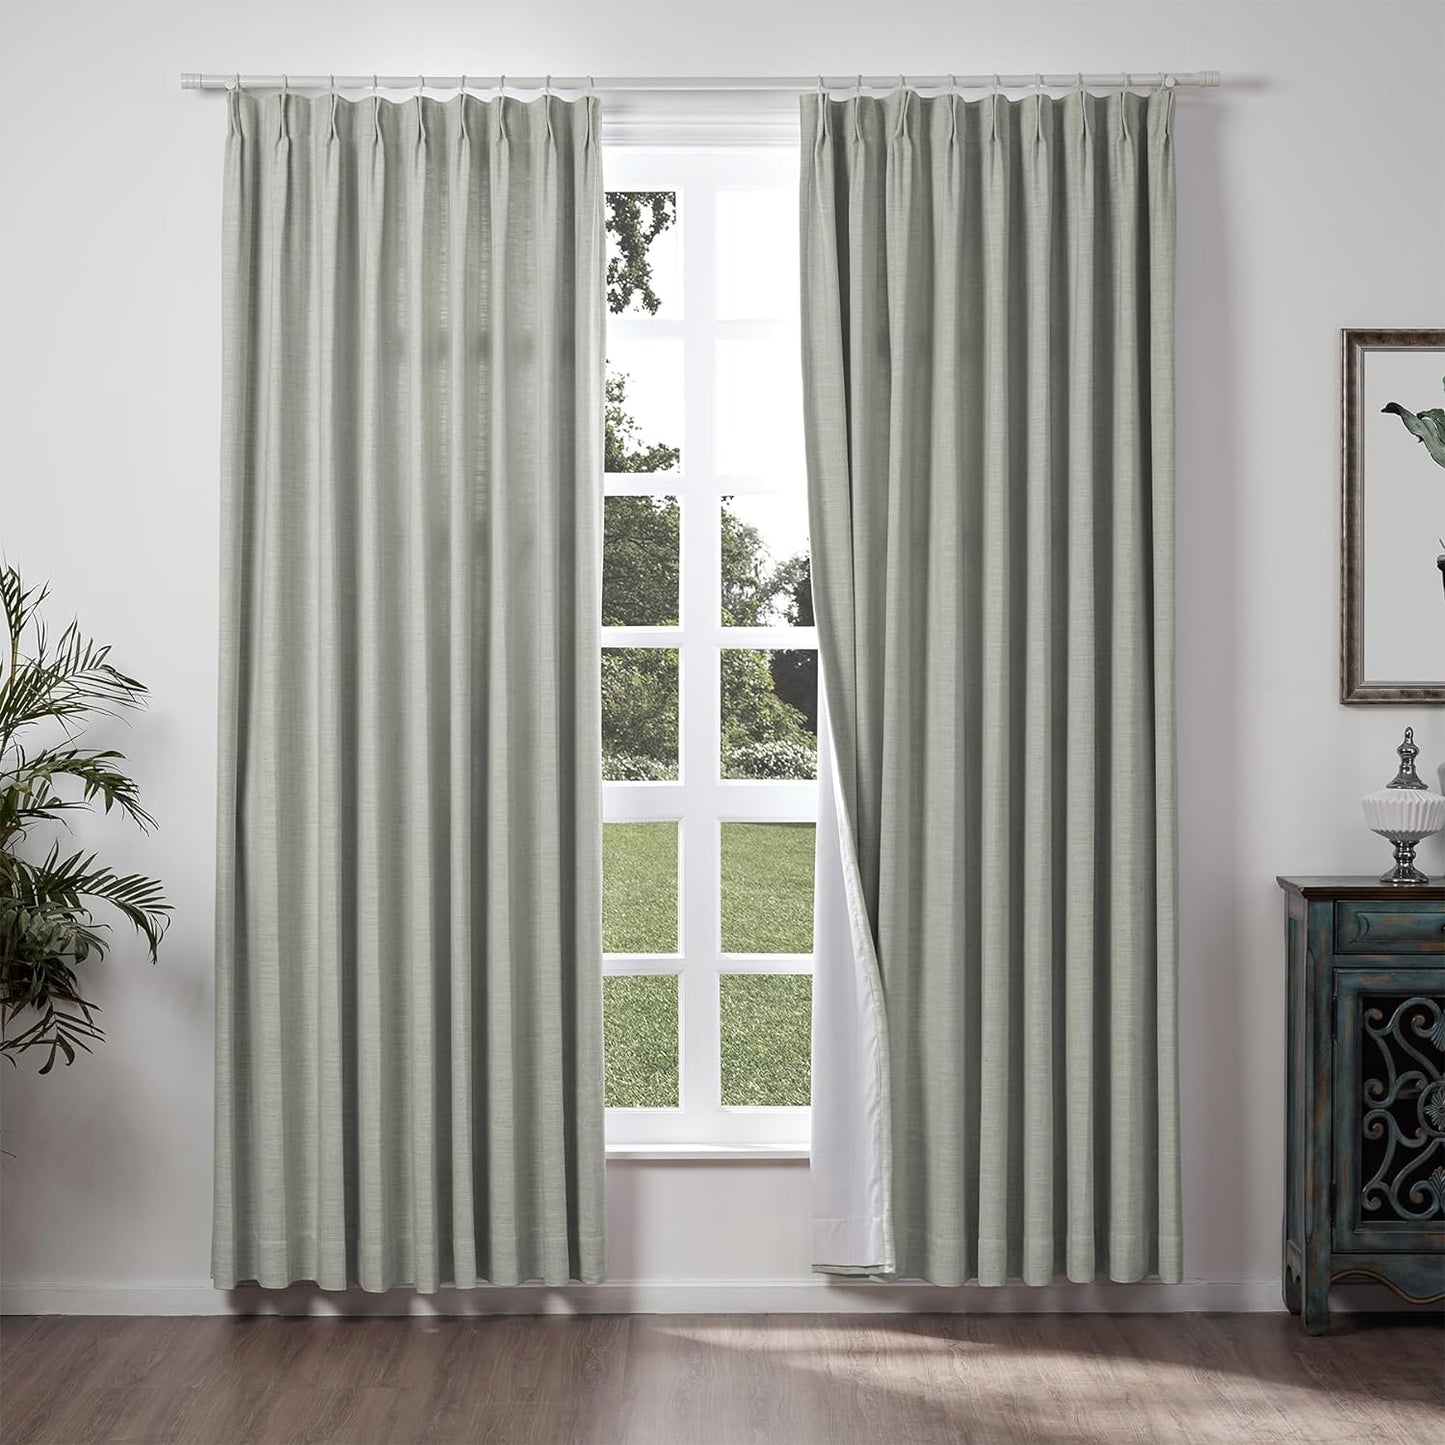 Chadmade 50" W X 63" L Polyester Linen Drape with Blackout Lining Pinch Pleat Curtain for Sliding Door Patio Door Living Room Bedroom, (1 Panel) Sand Beige Tallis Collection  ChadMade Pure Cahmere (15) 72Wx84L 